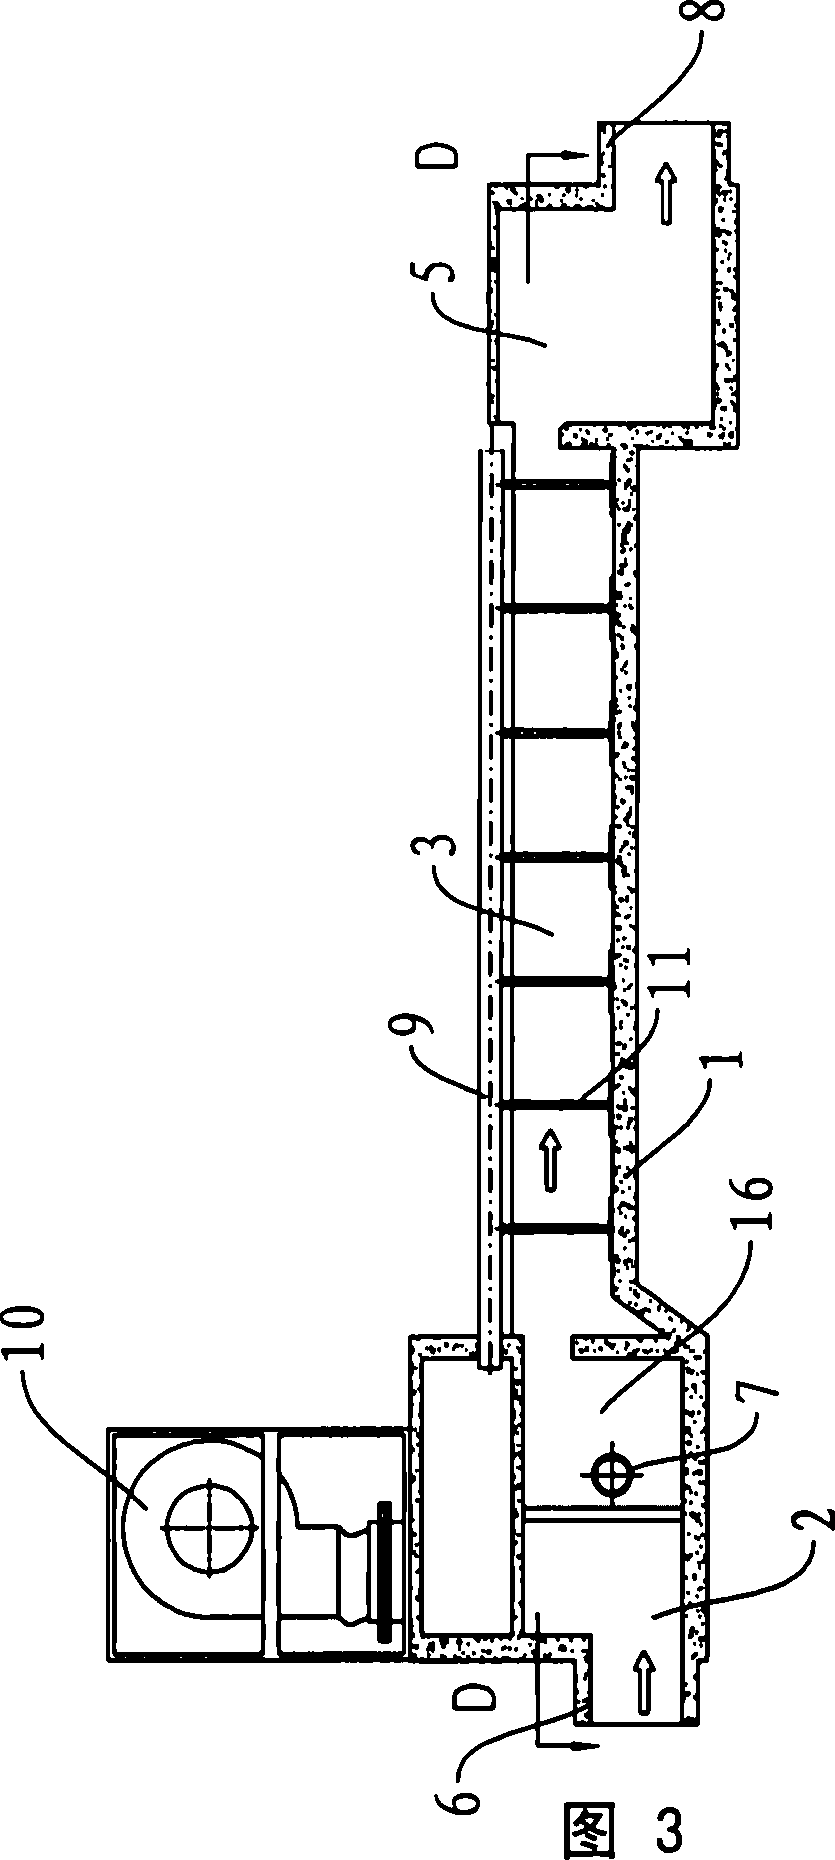 Device for desulfurization and recovery of seawater by industrial flue gas